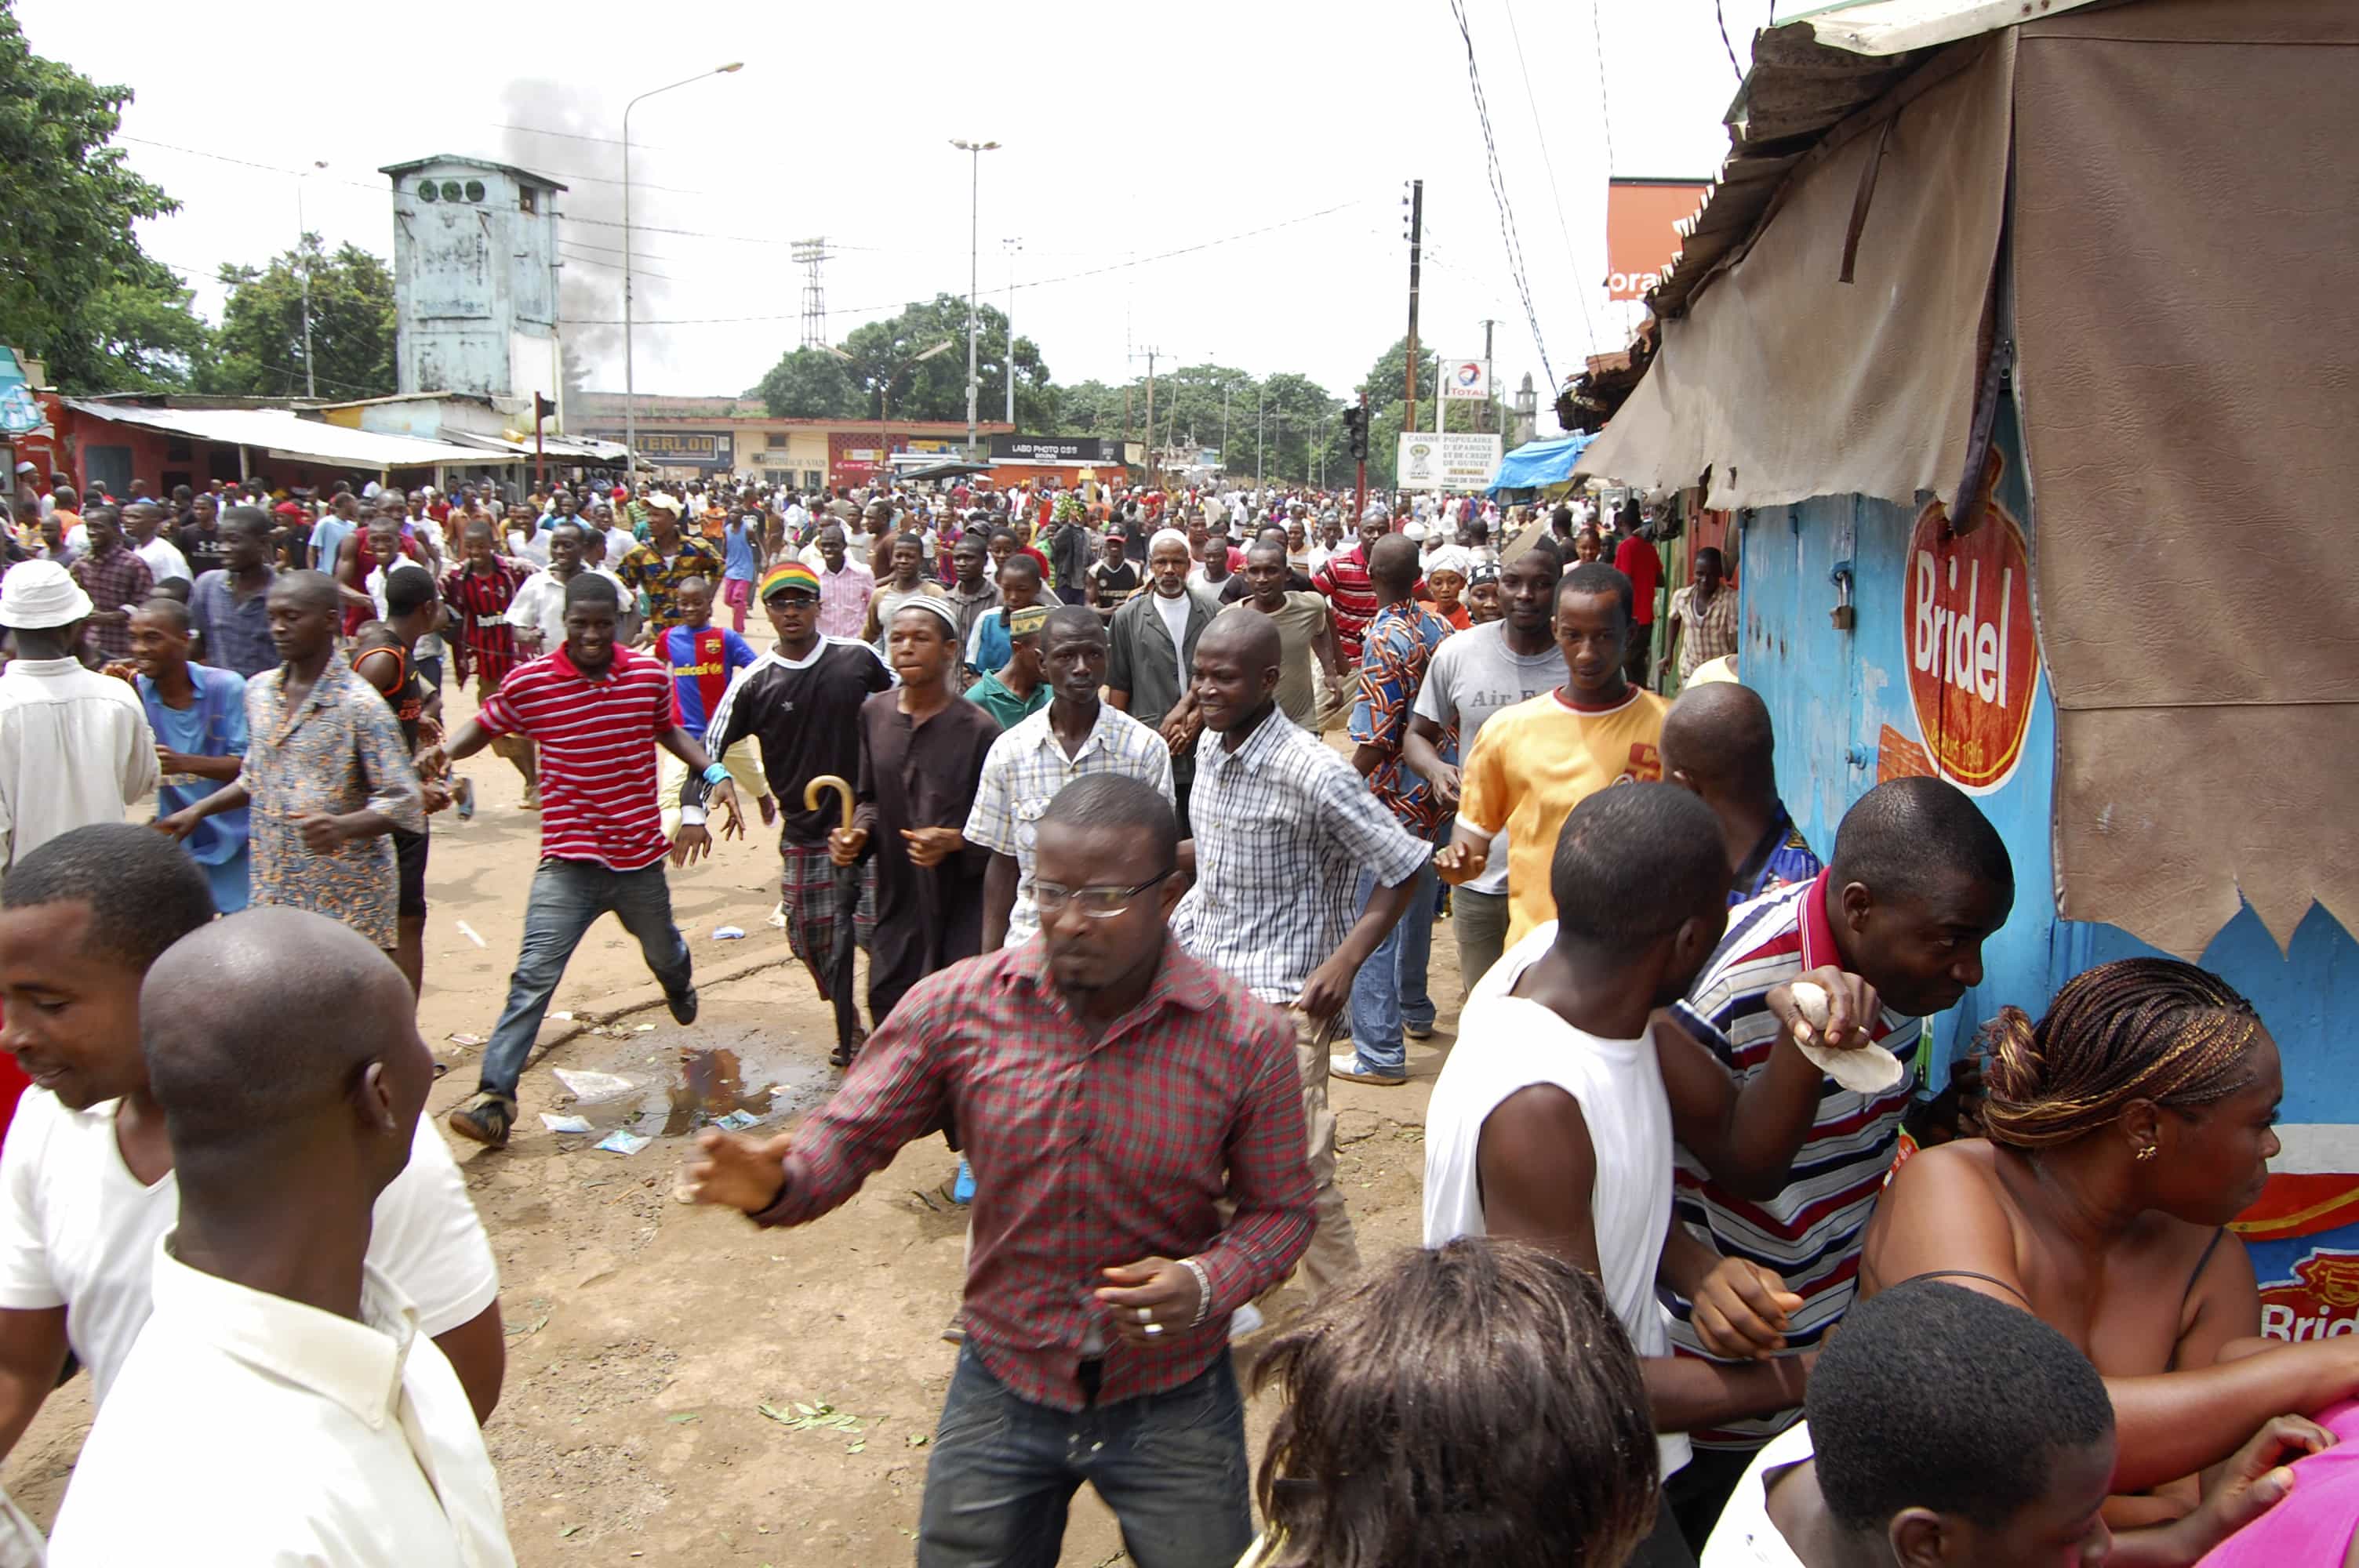 Guinean demonstrators flee as security forces disperse them from outside the stadium where tens of thousands gathered for a pro-democracy rally, in Conakry, 28 September 2009, AP Photo/Idrissa Soumare